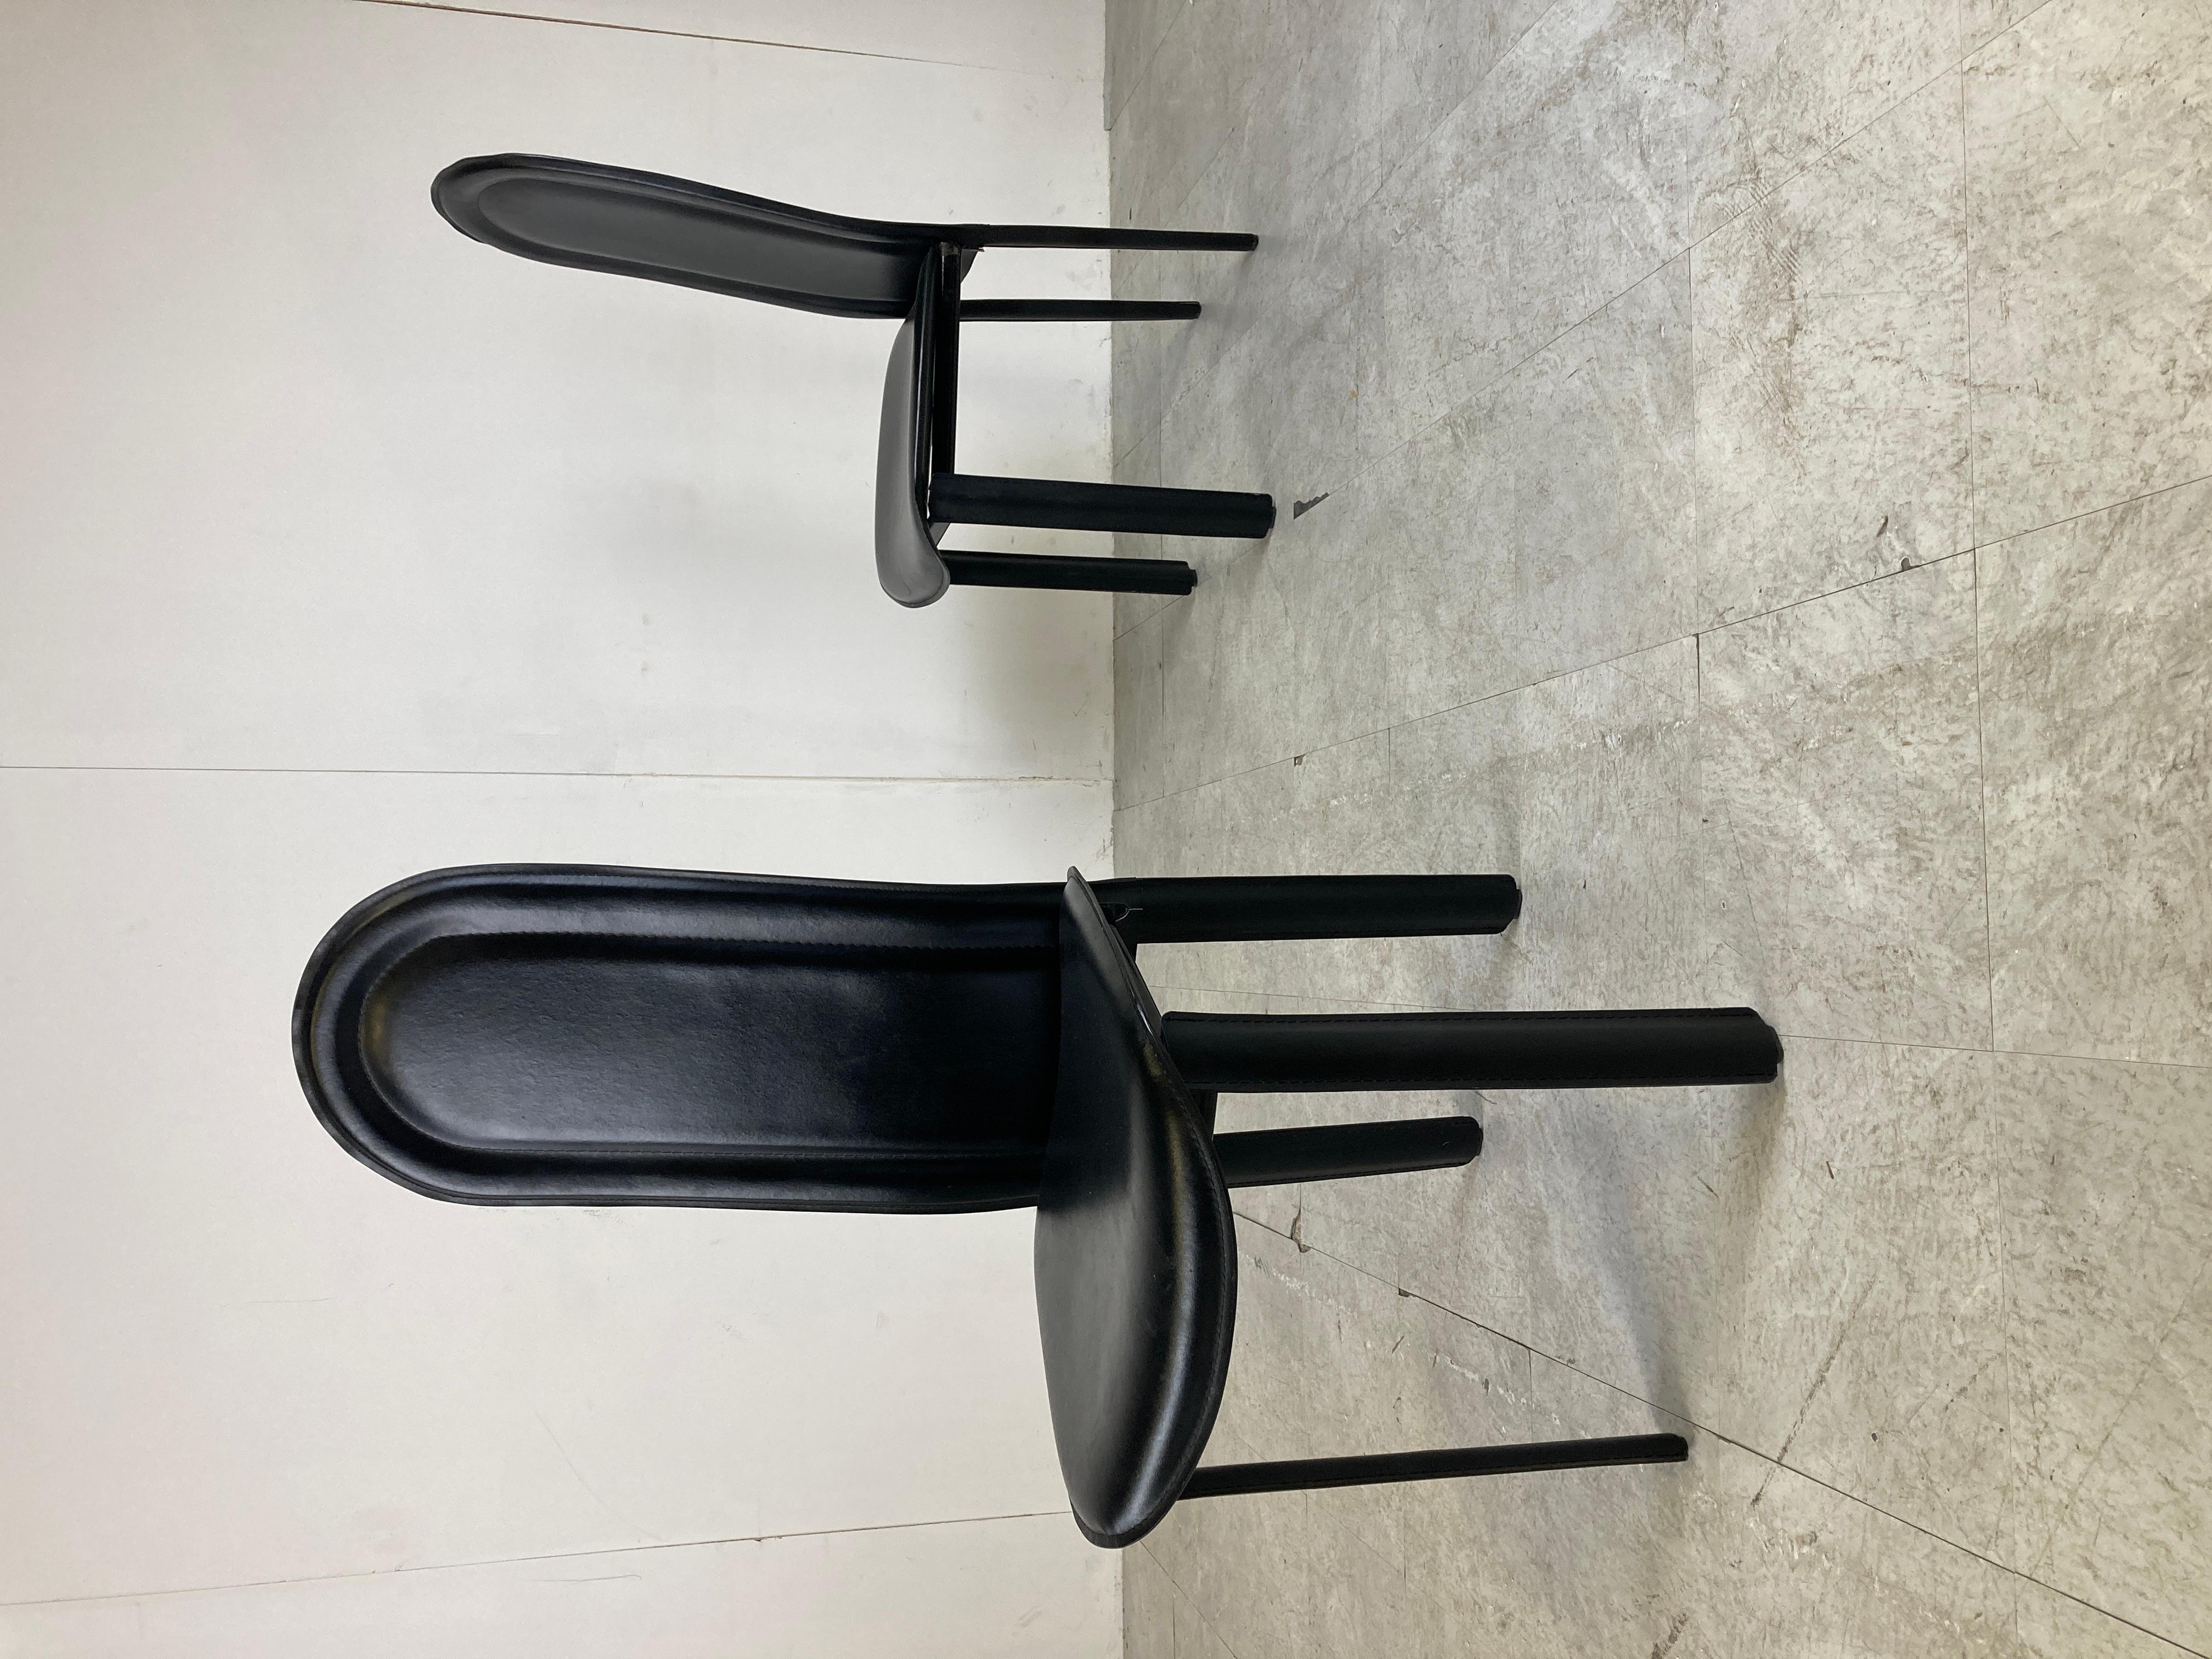 Set of 4 black Italian leather high back dining chairs.

Beautiful sleek and timeless design.

The chairs are in good condition with minimal wear.

1980s - Italy

Dimensions
Height: 108cm/42.51